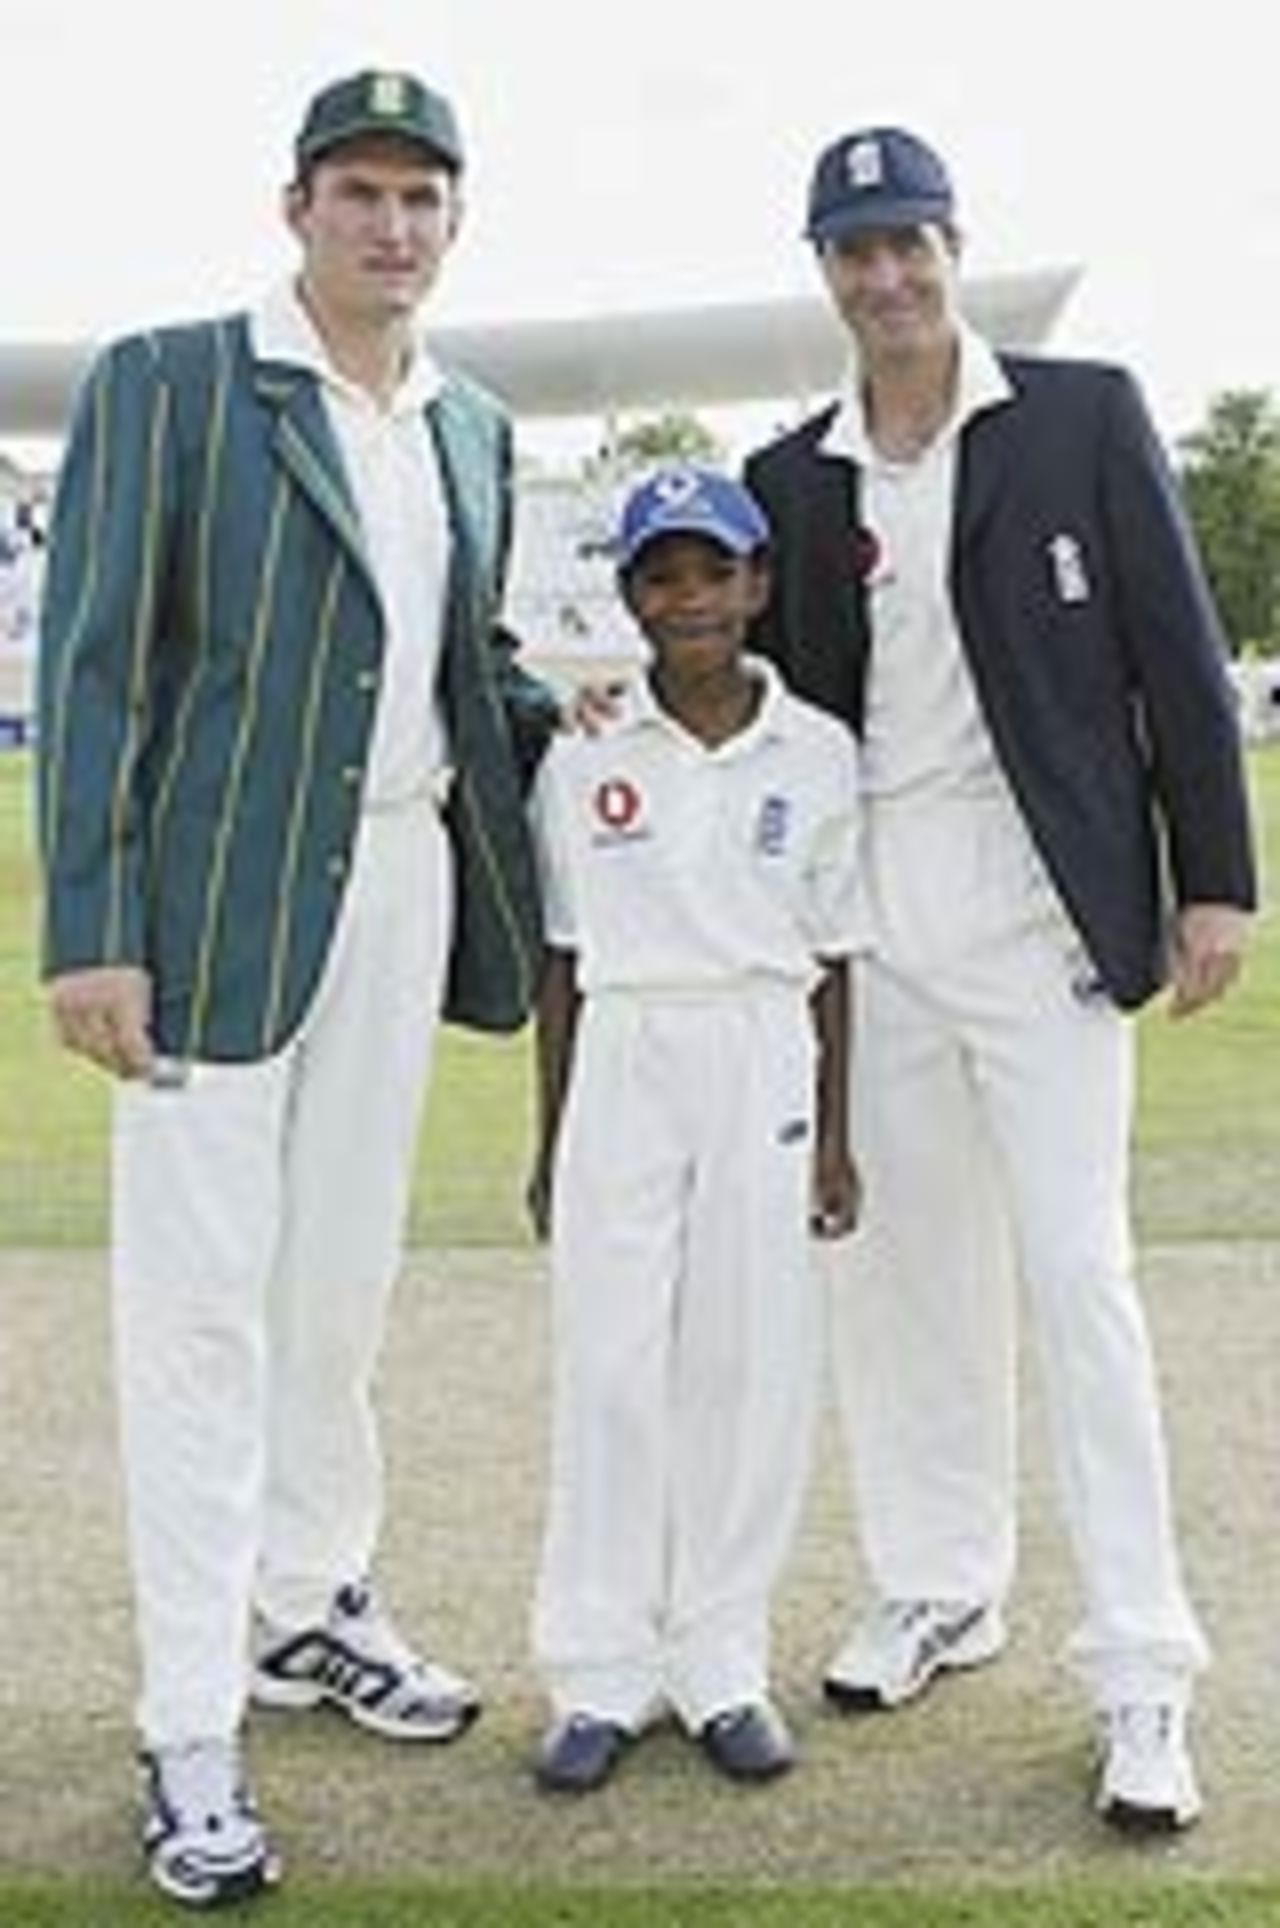 Graeme Smith and Michael Vaughan pose with a mascot, Nottingham, August 13, 2003